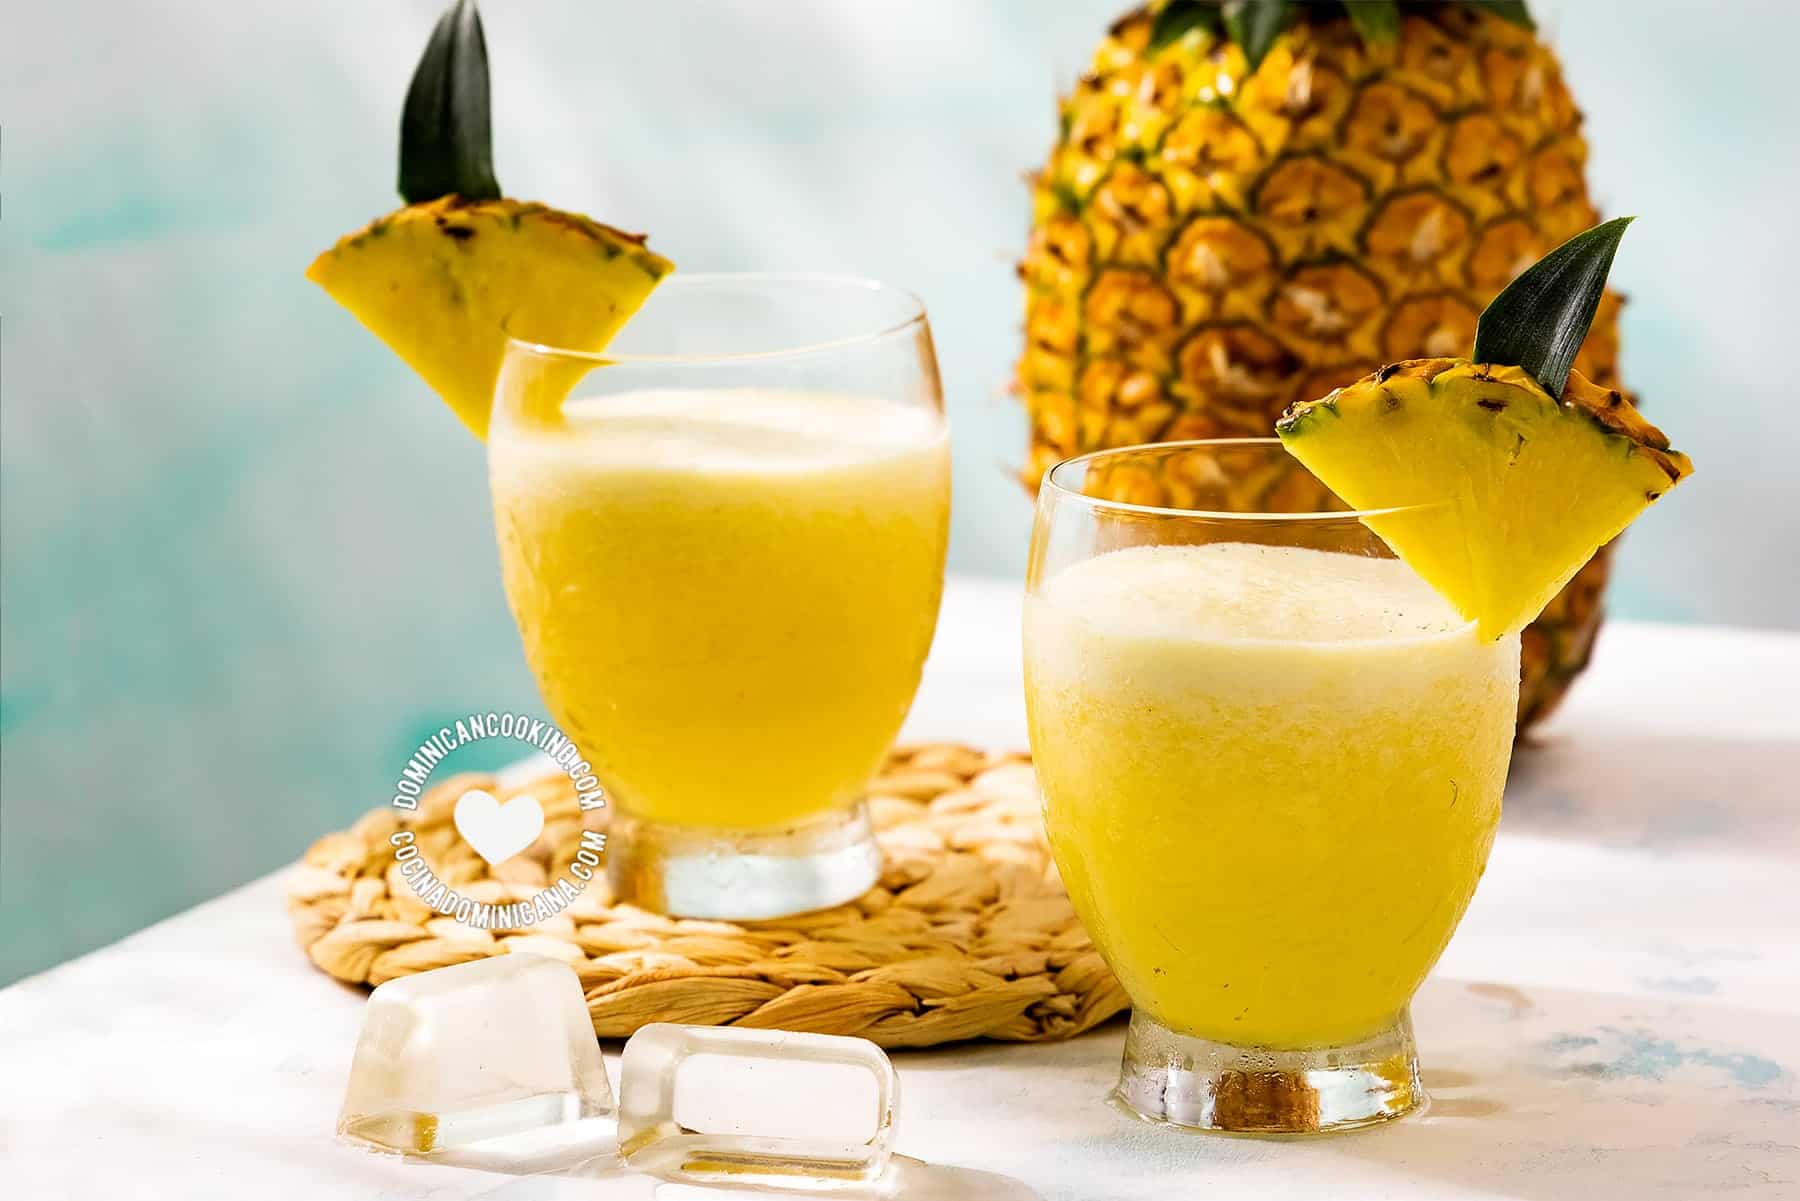 Pineapple and rice drink.